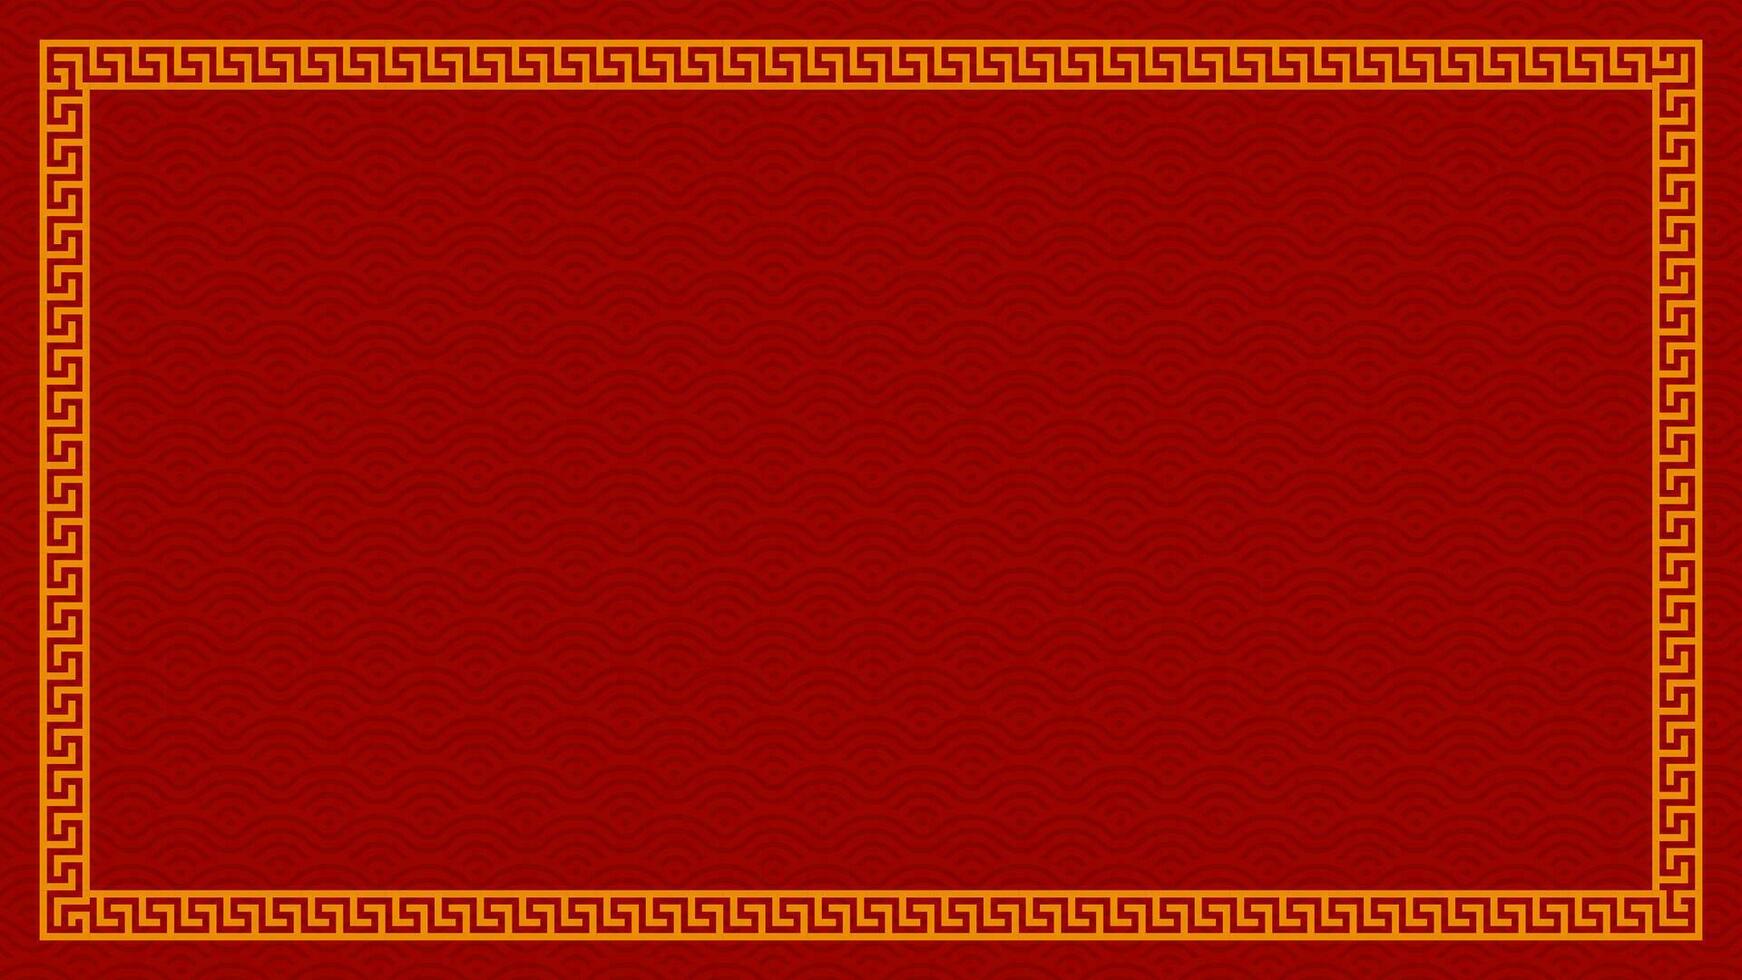 Chinese banner frame border. vector illustration element. Chinese new year traditional decor design